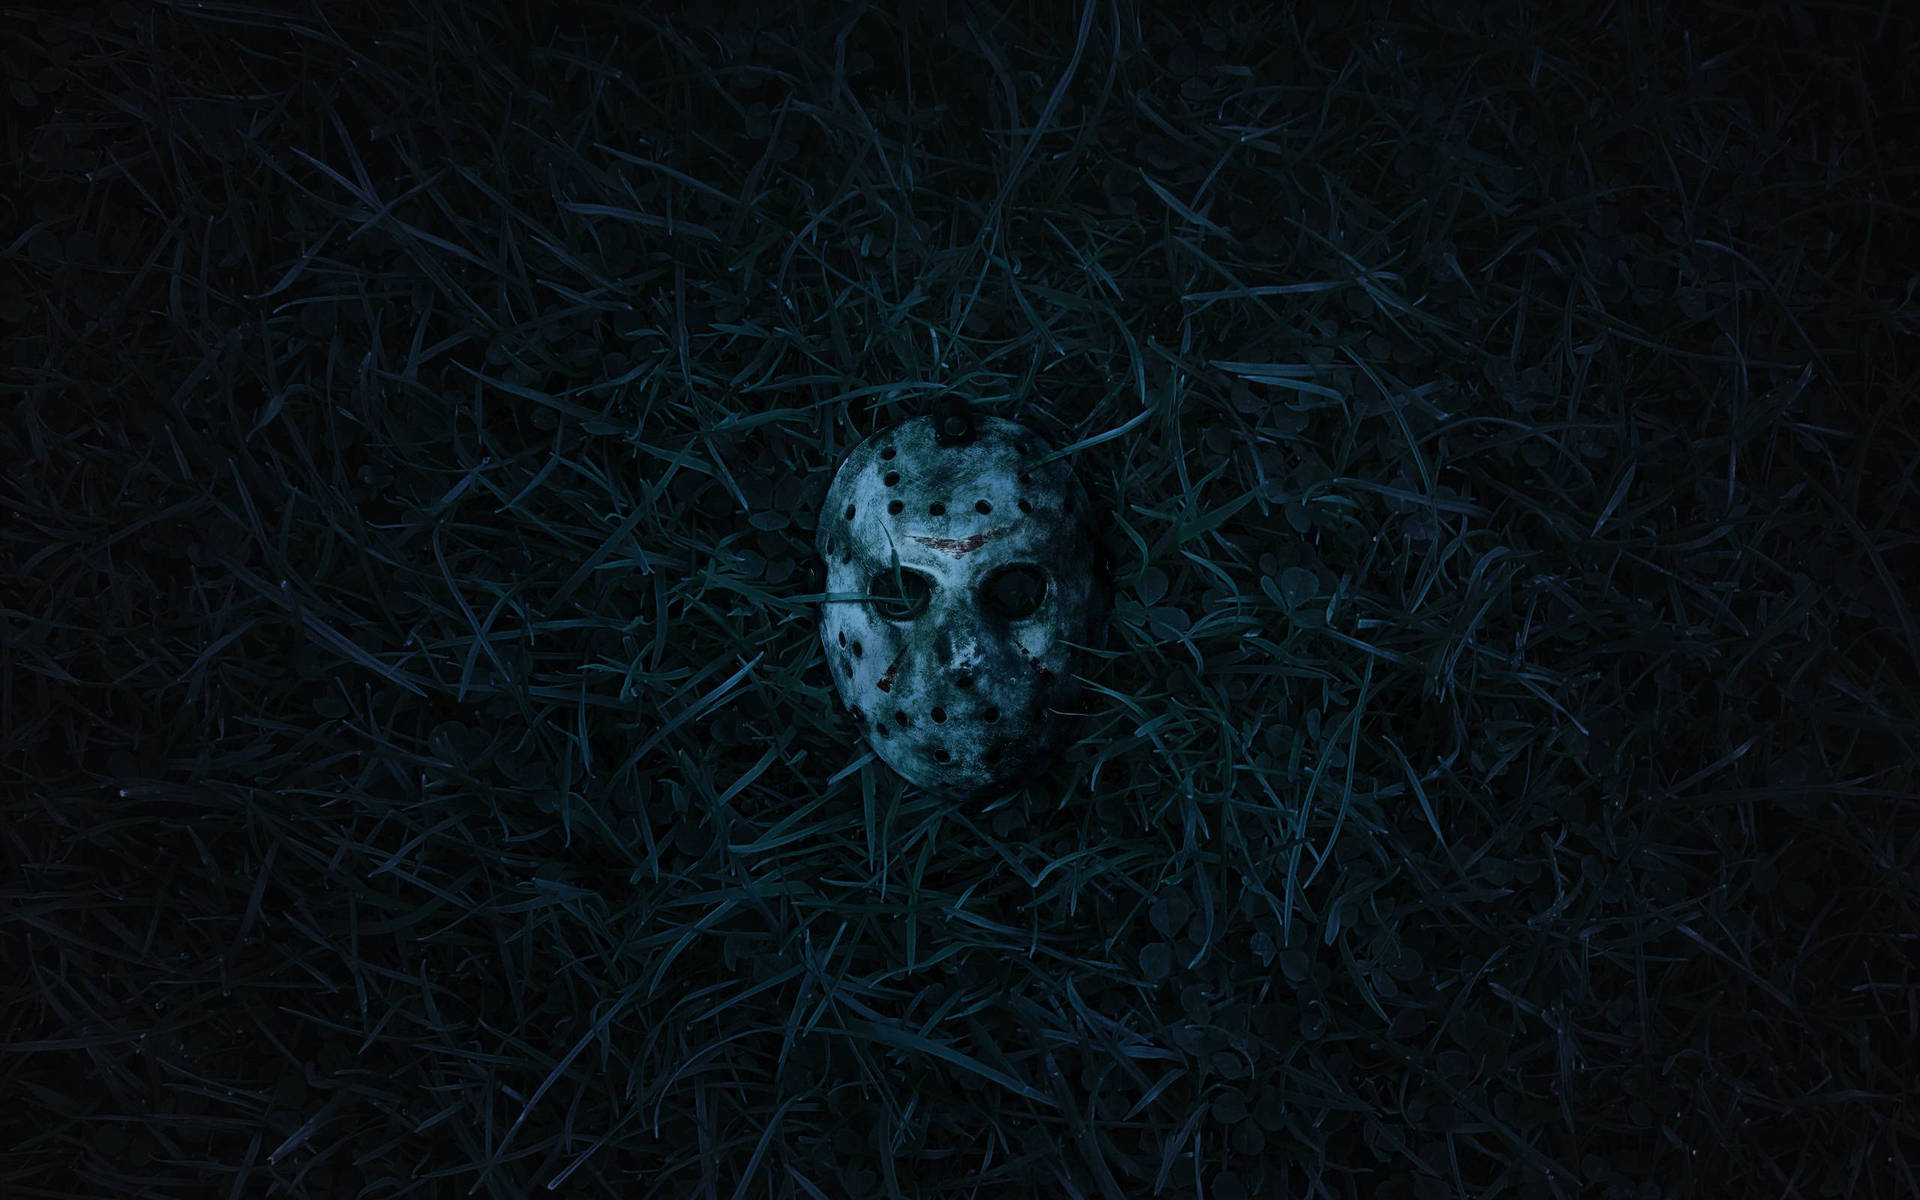 Friday The 13th Mask In Grass Background